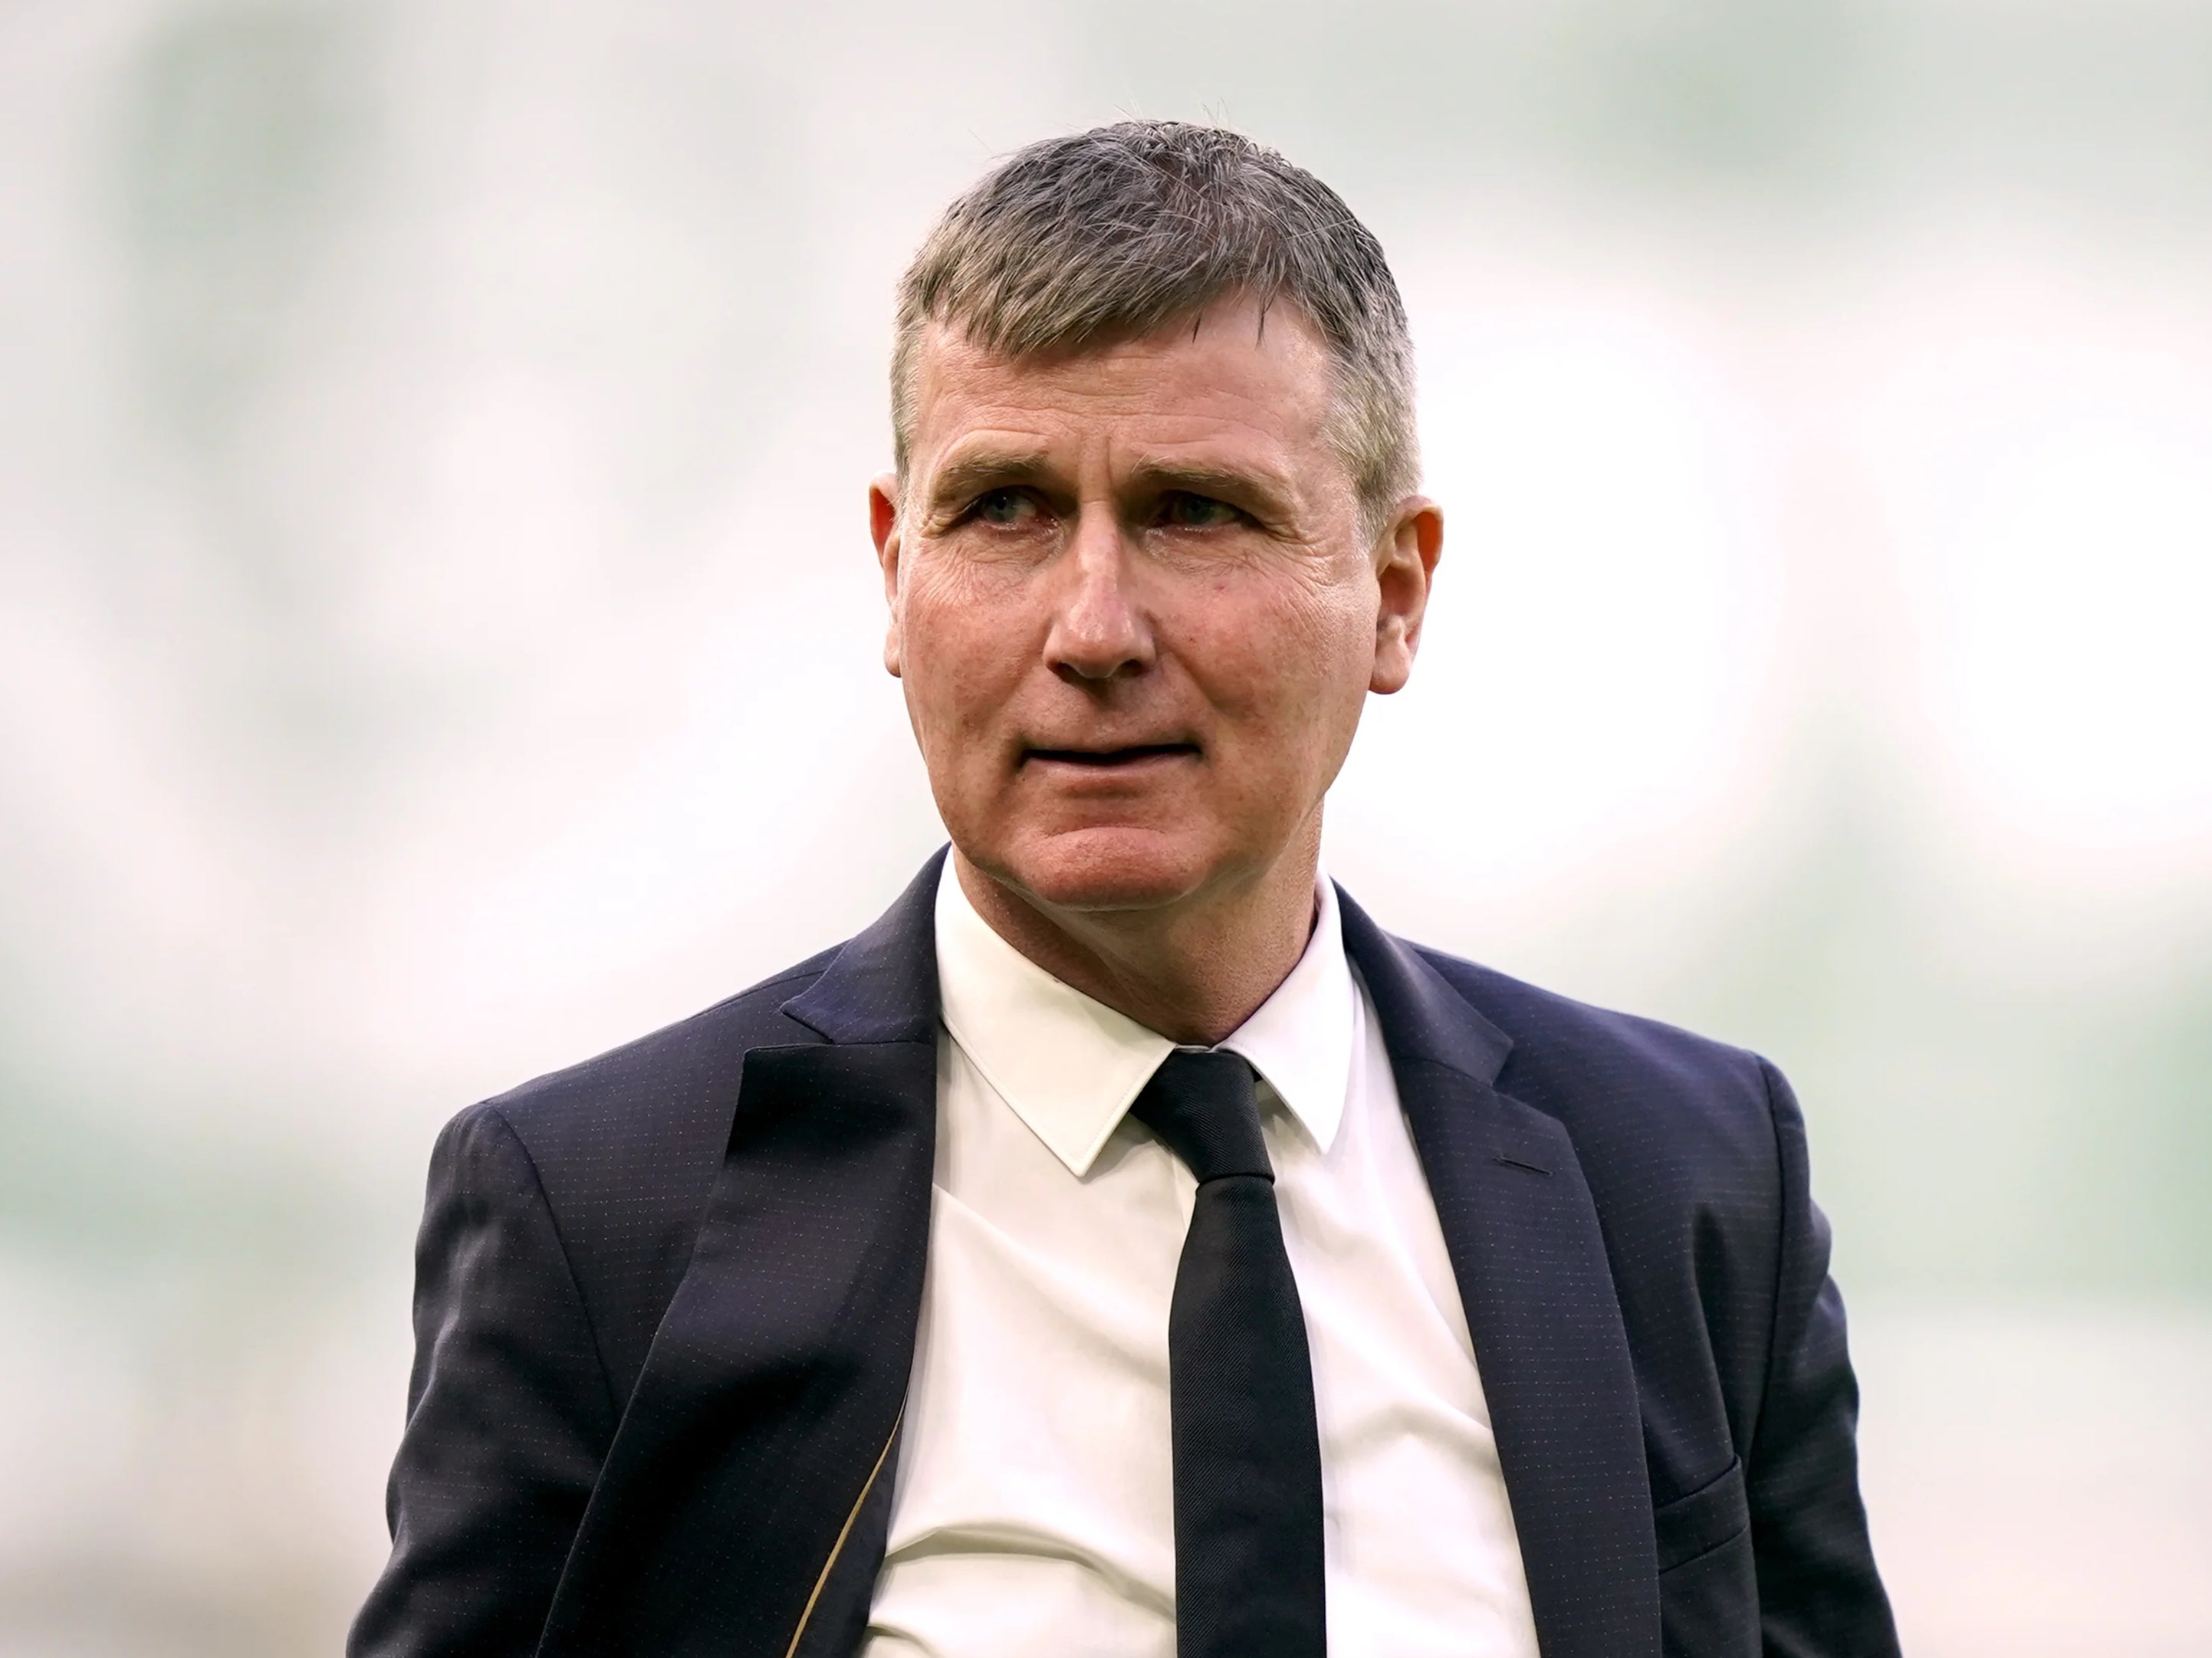 Republic of Ireland manager Stephen Kenny has insisted he does not feel under pressure despite presiding over a losing start to the new Nations League campaign